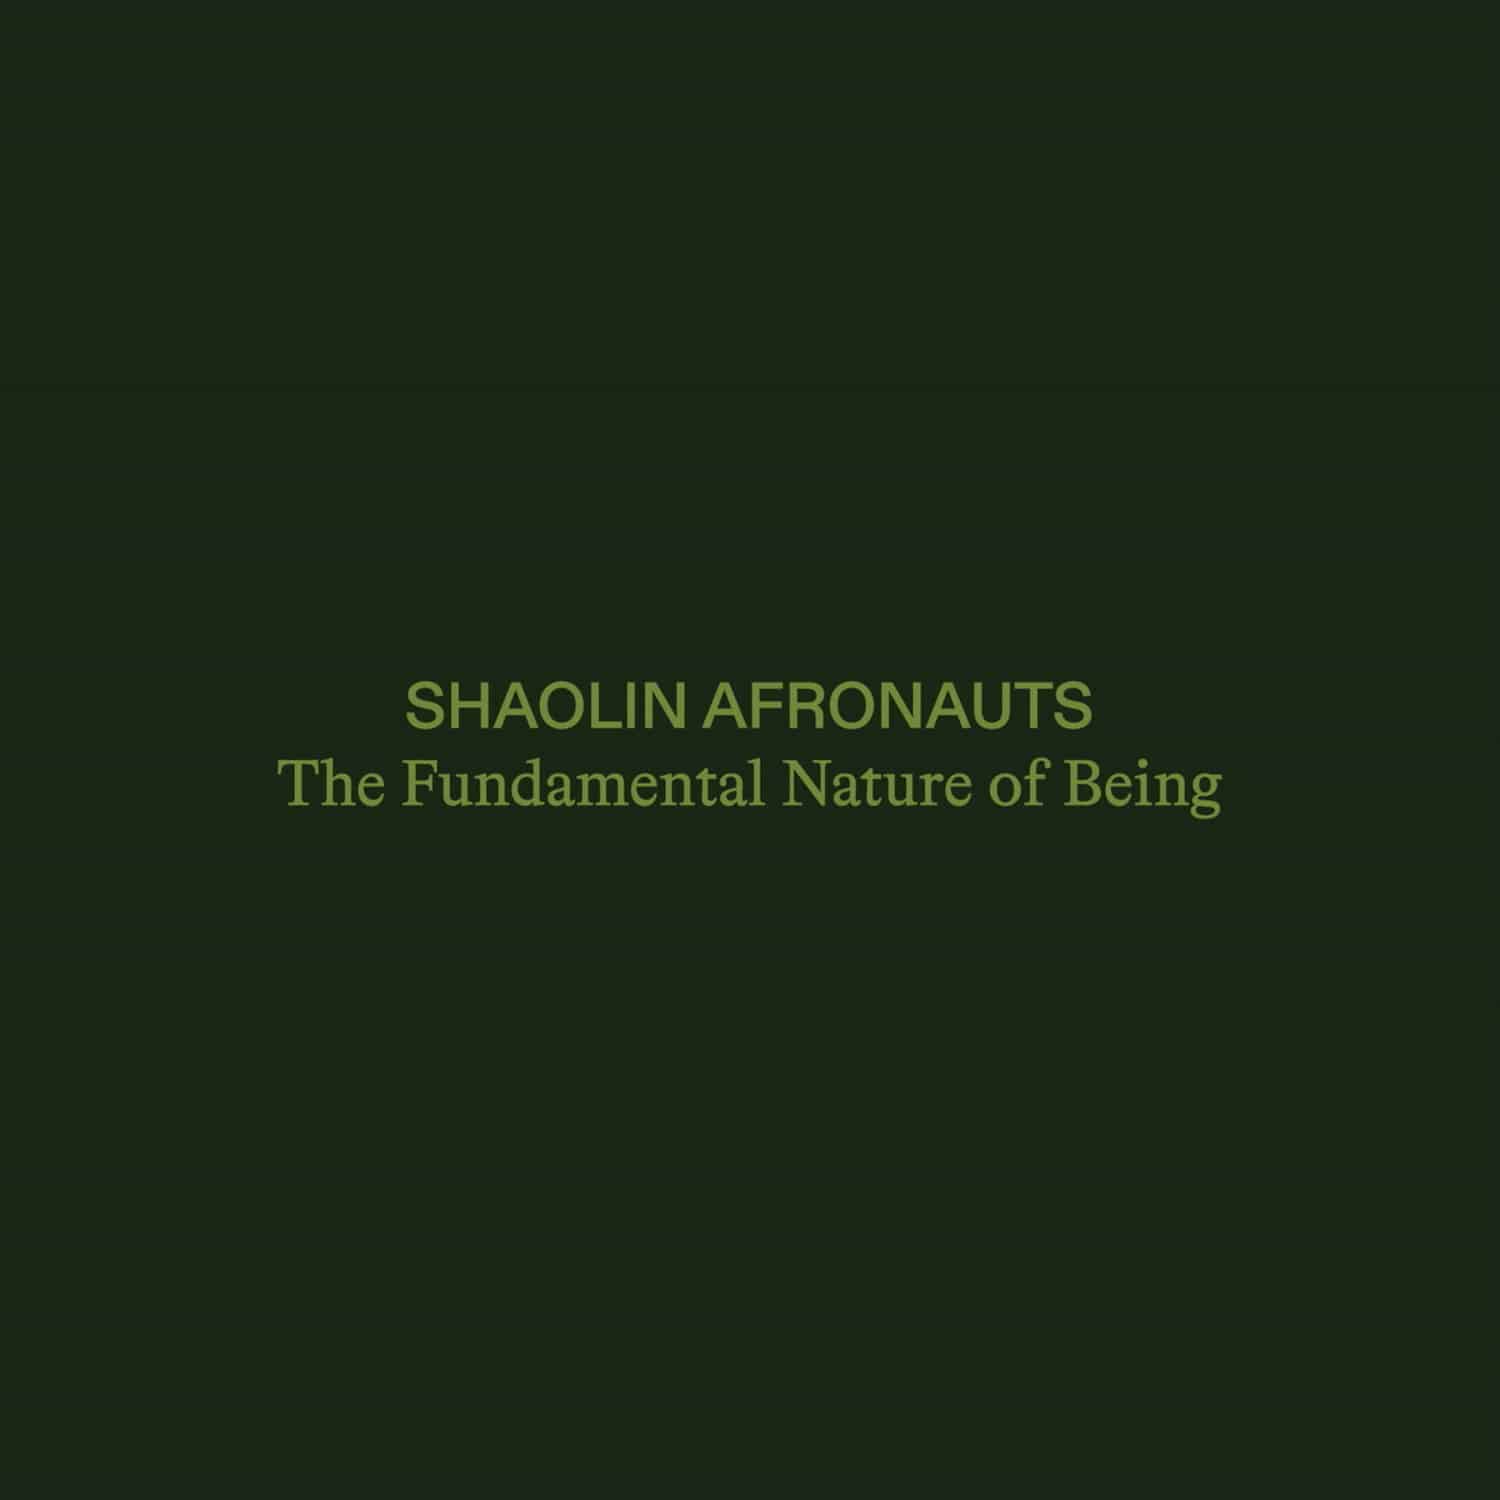 The Shaolin Afronauts - THE FUNDAMENTAL NATURE OF BEING 